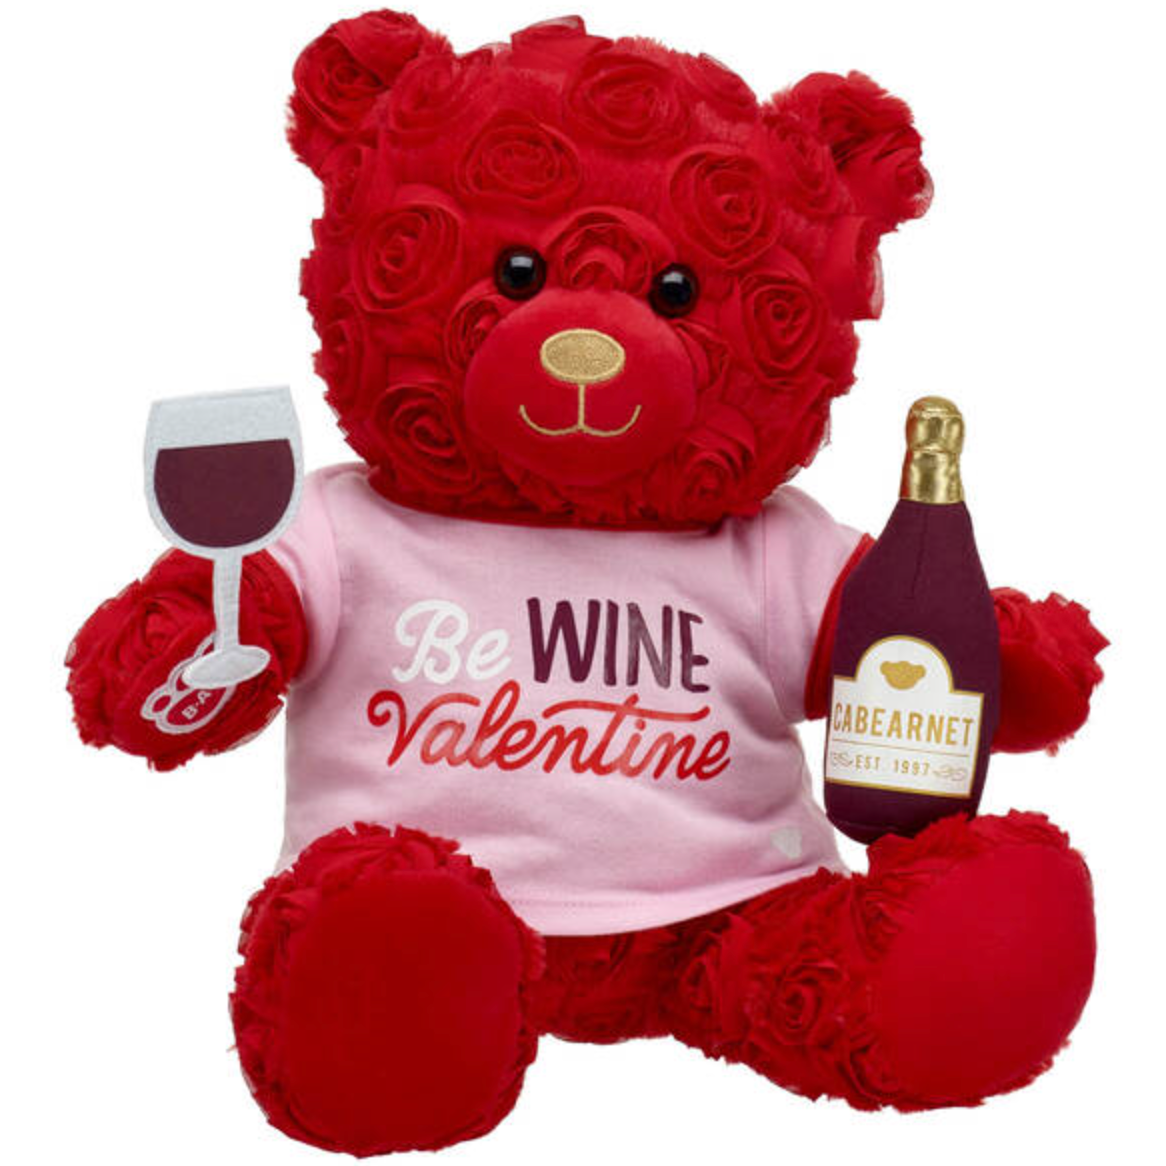 The Build-A-Bear Workshop After Dark Collection: Grown-Up Teddy Bears That  Make Adorable Valentine's Day Gifts